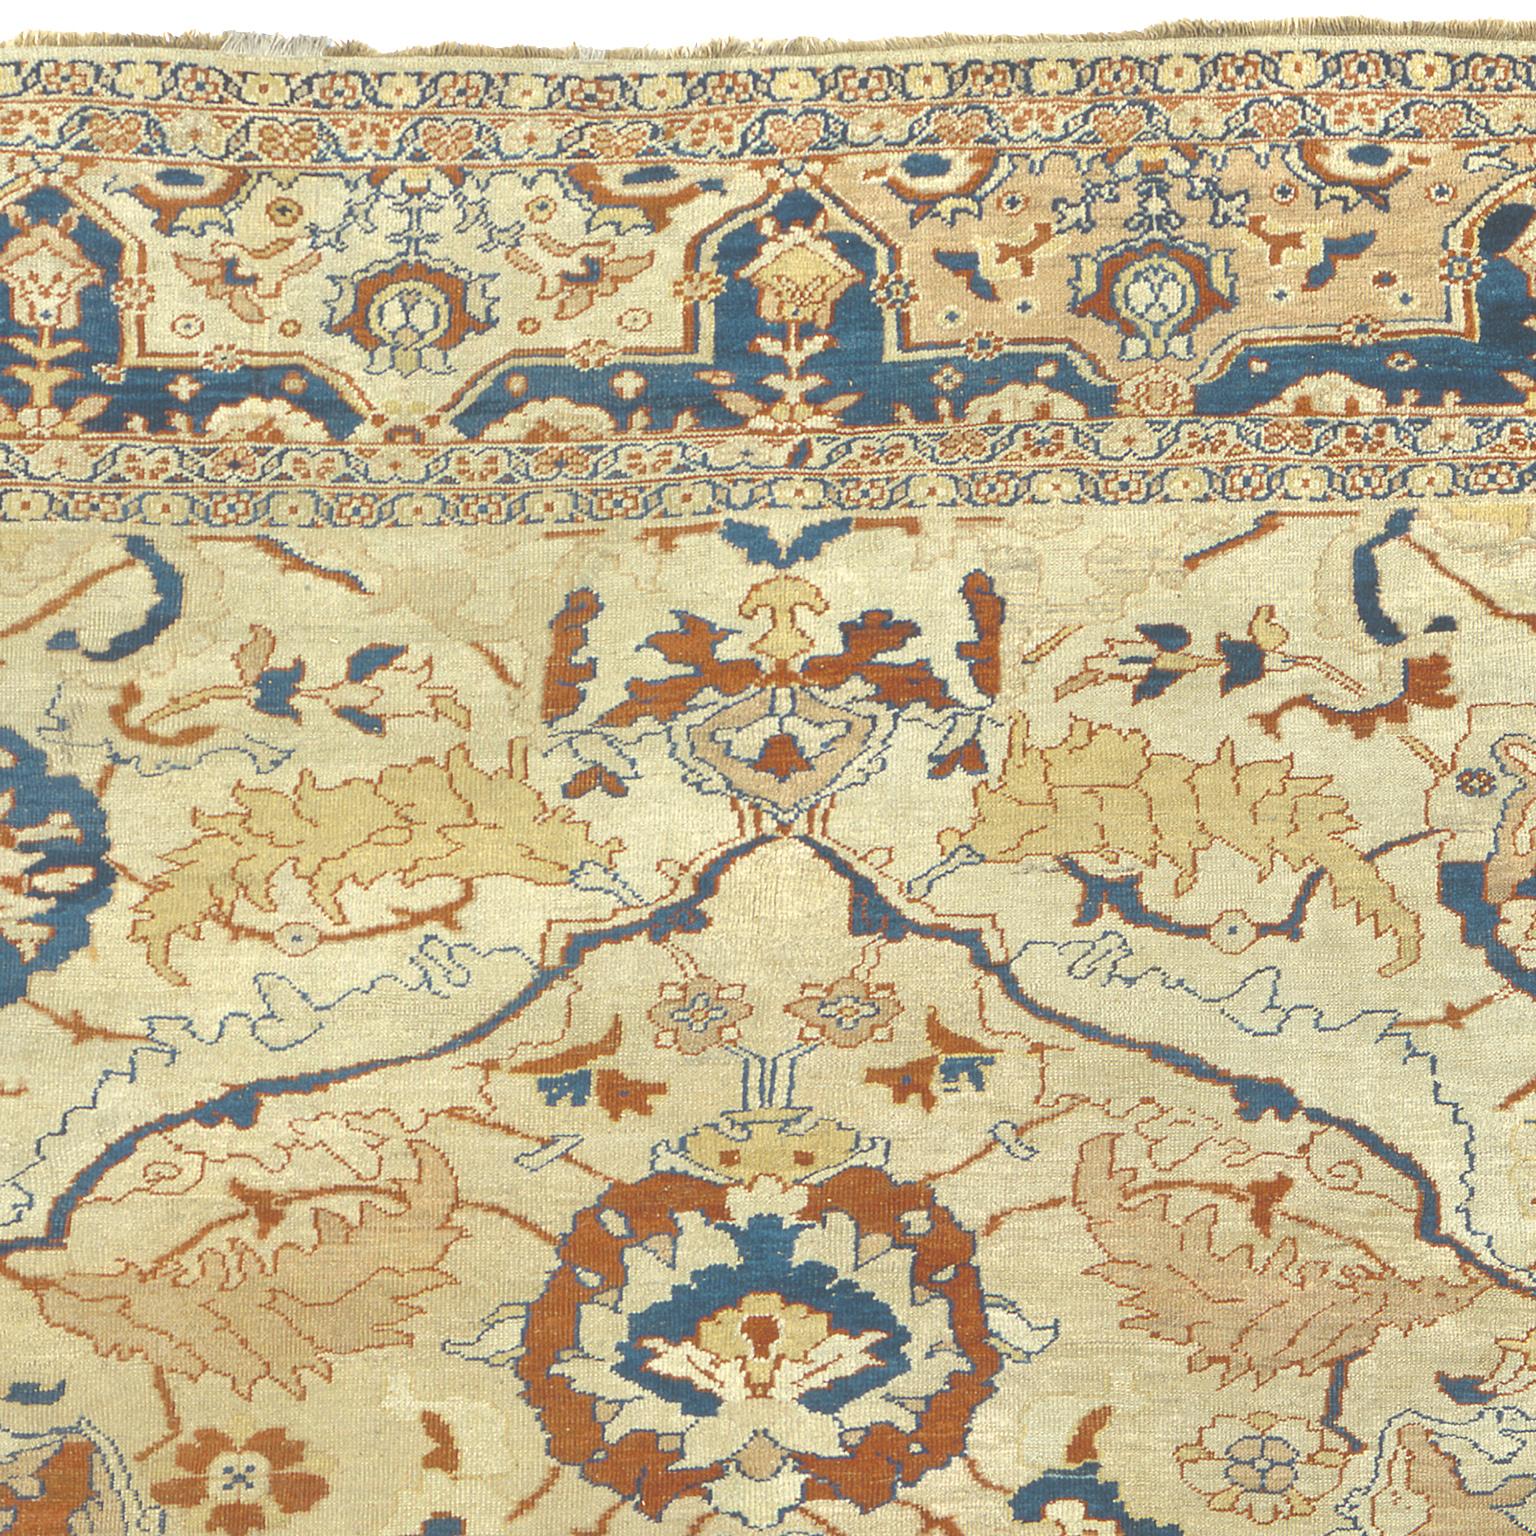 Late 19th Century Persian Ziegler Sultanabad Rug In Good Condition For Sale In New York, NY